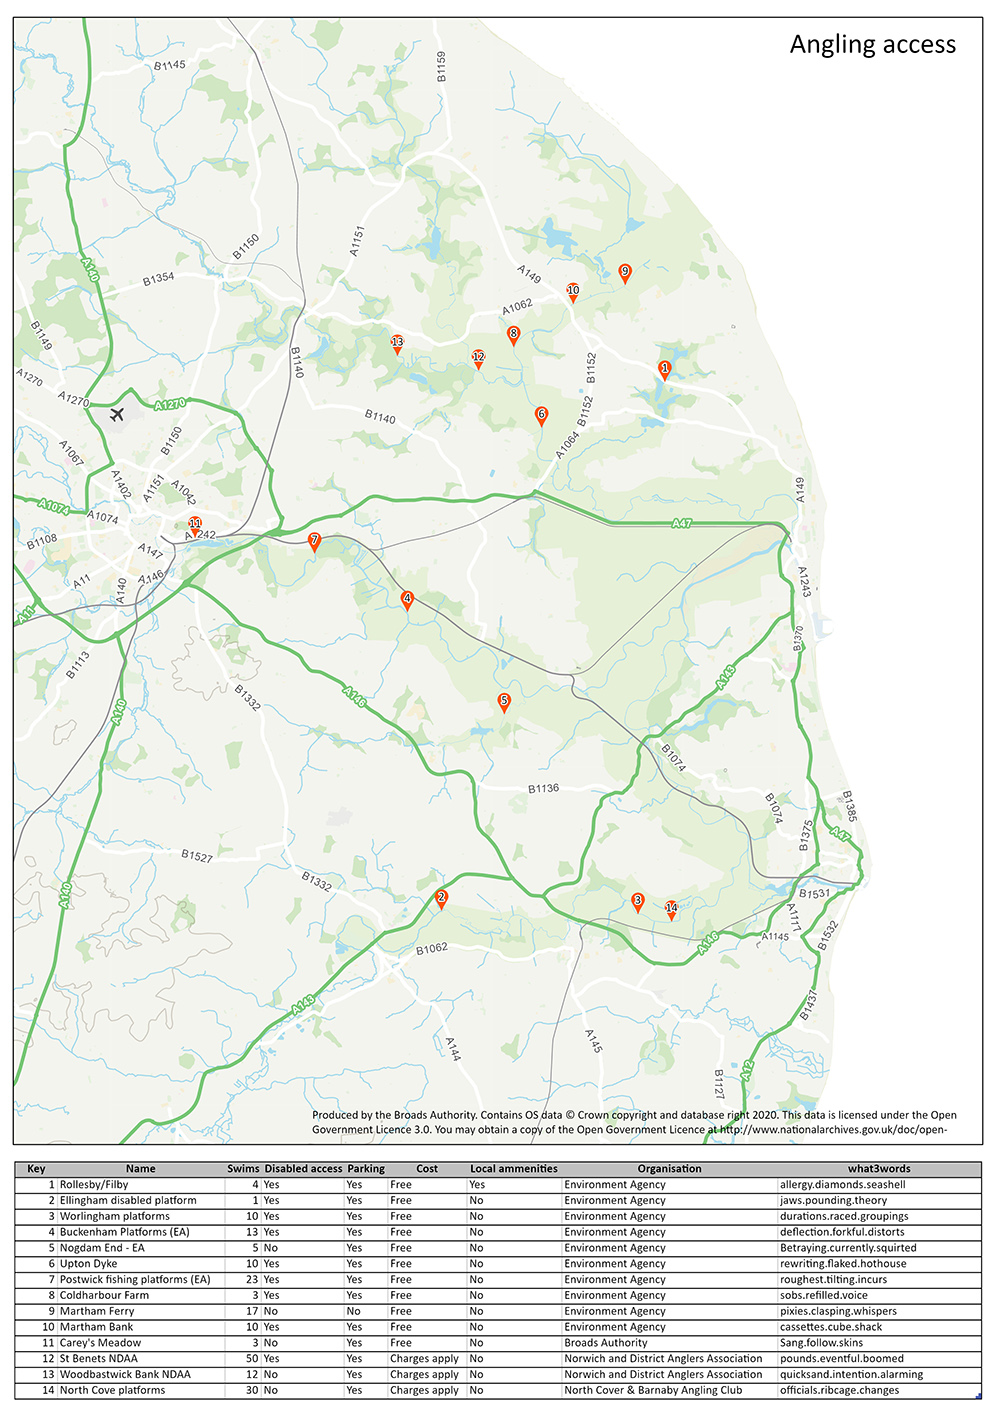 angling access map